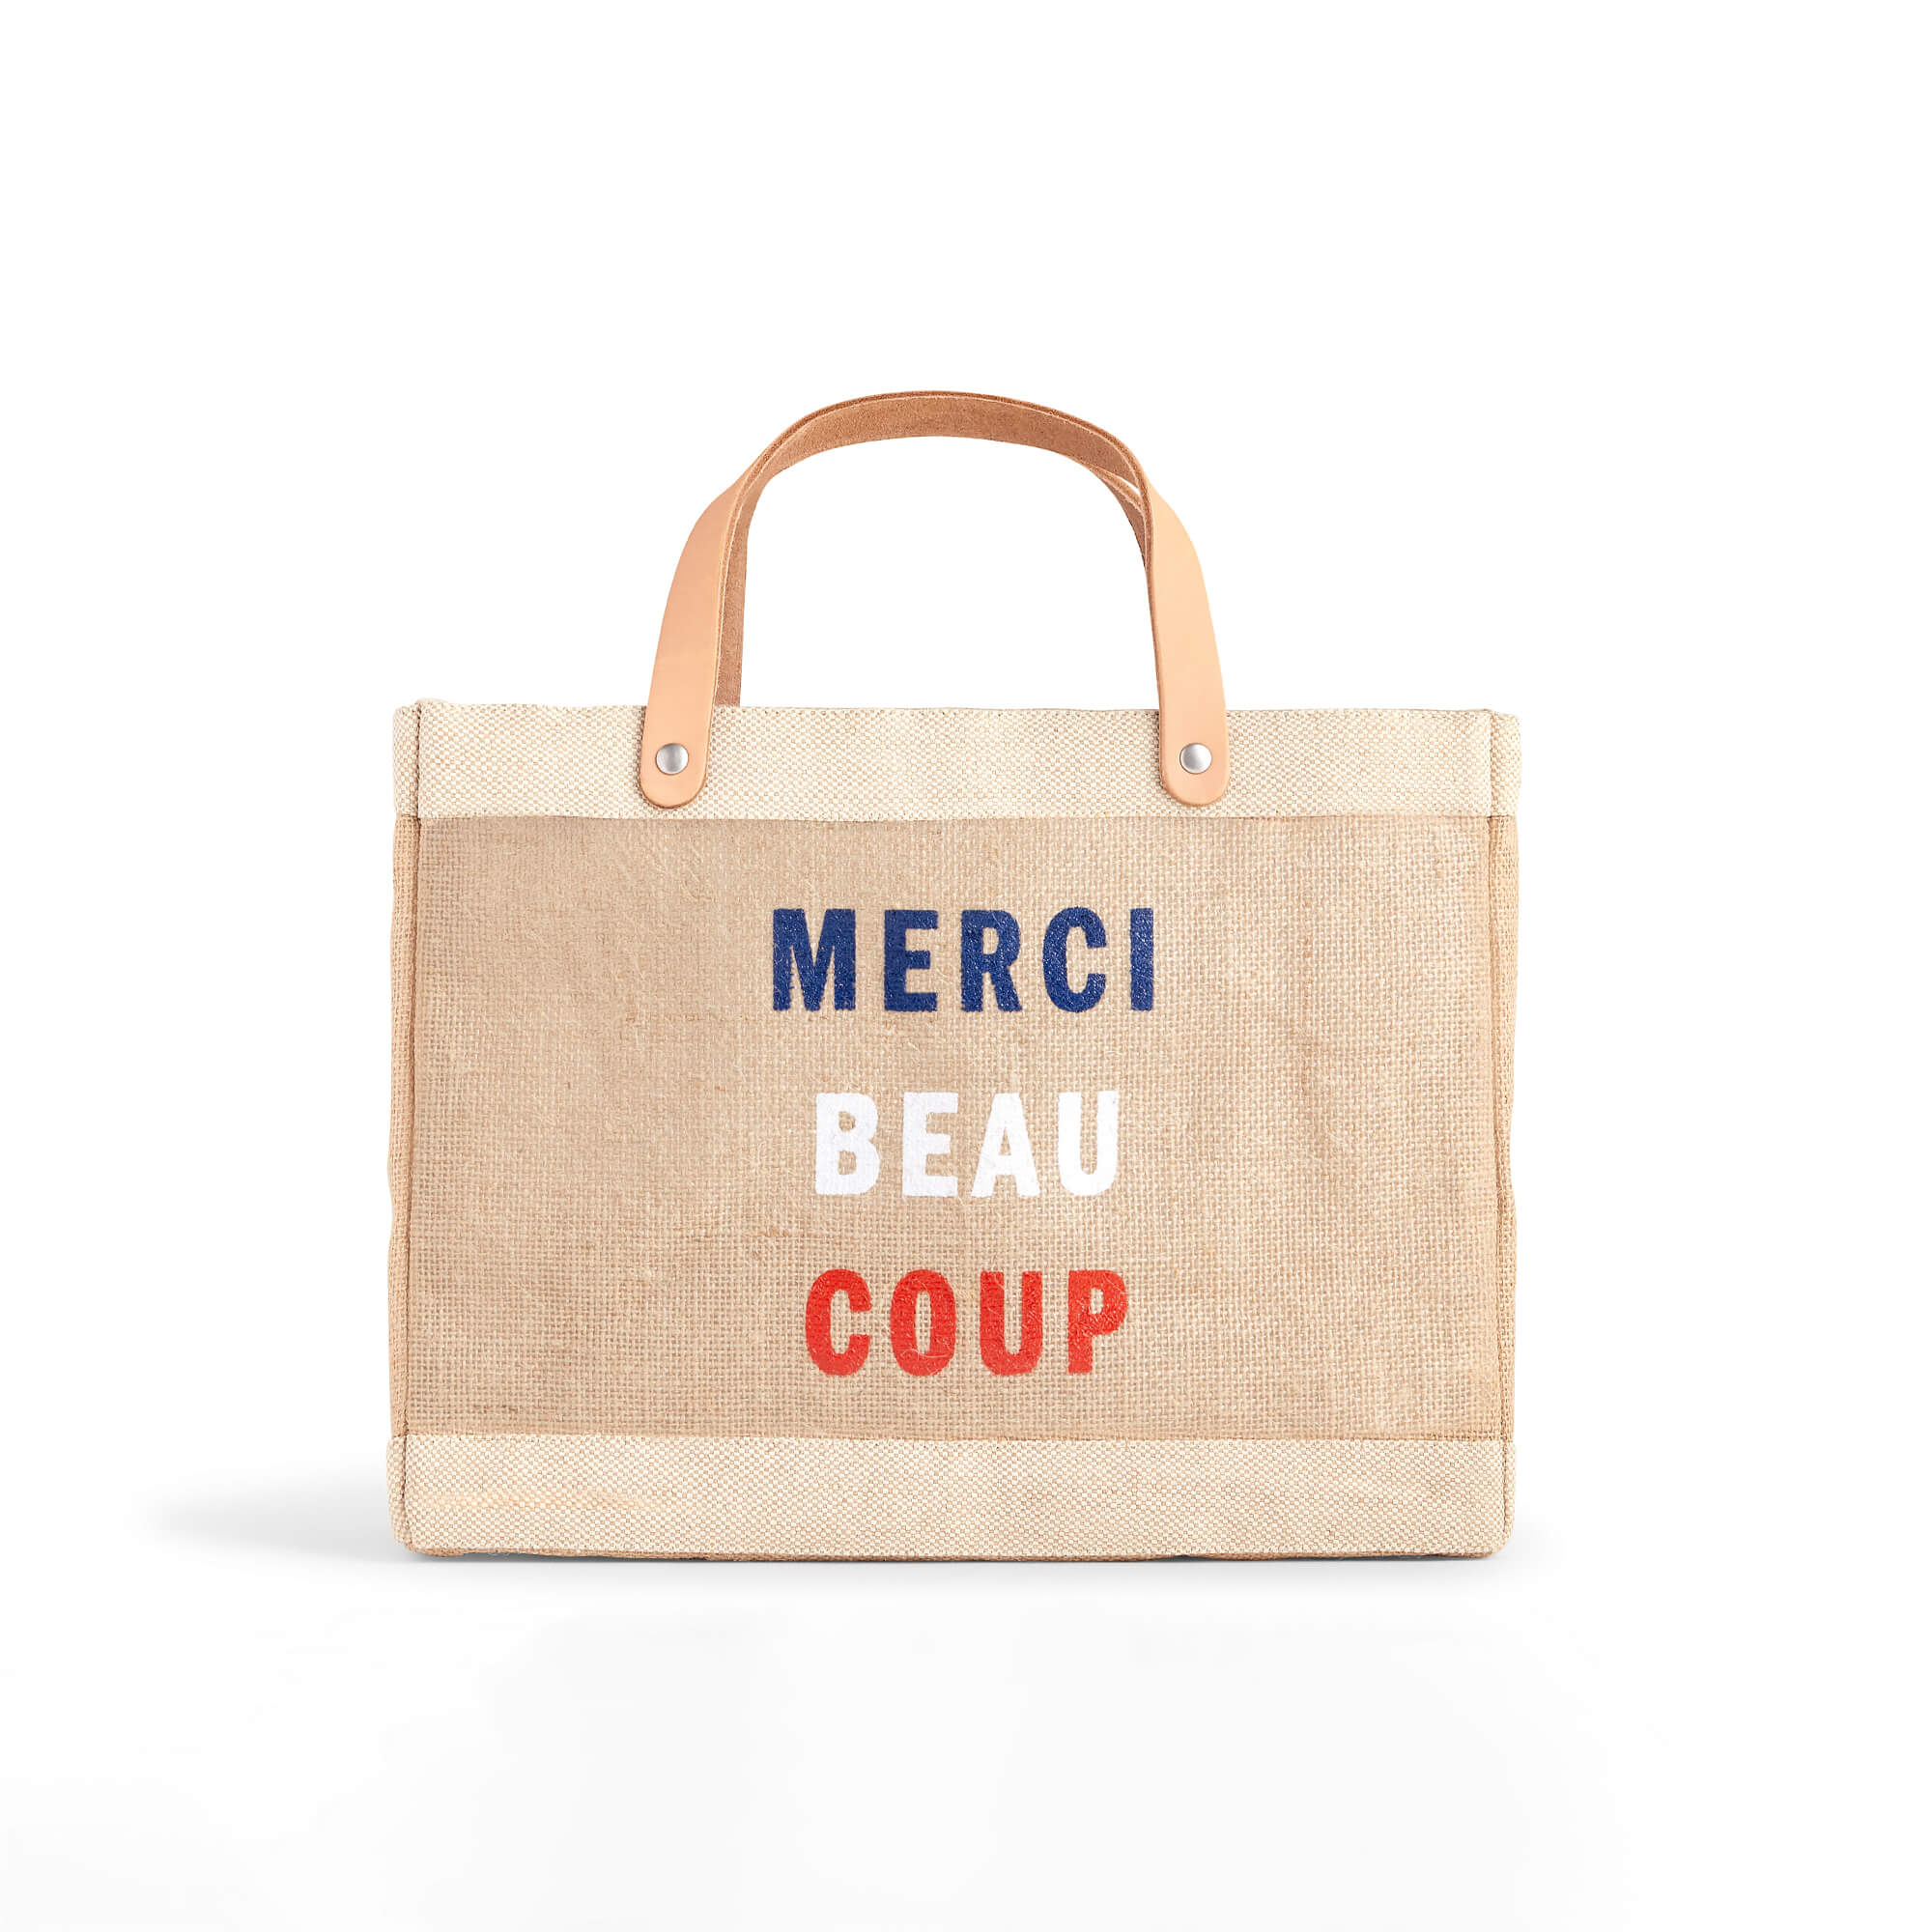 Petite Market Bag in Natural for Clare V. “Merci Beau Coup” – mindful giving